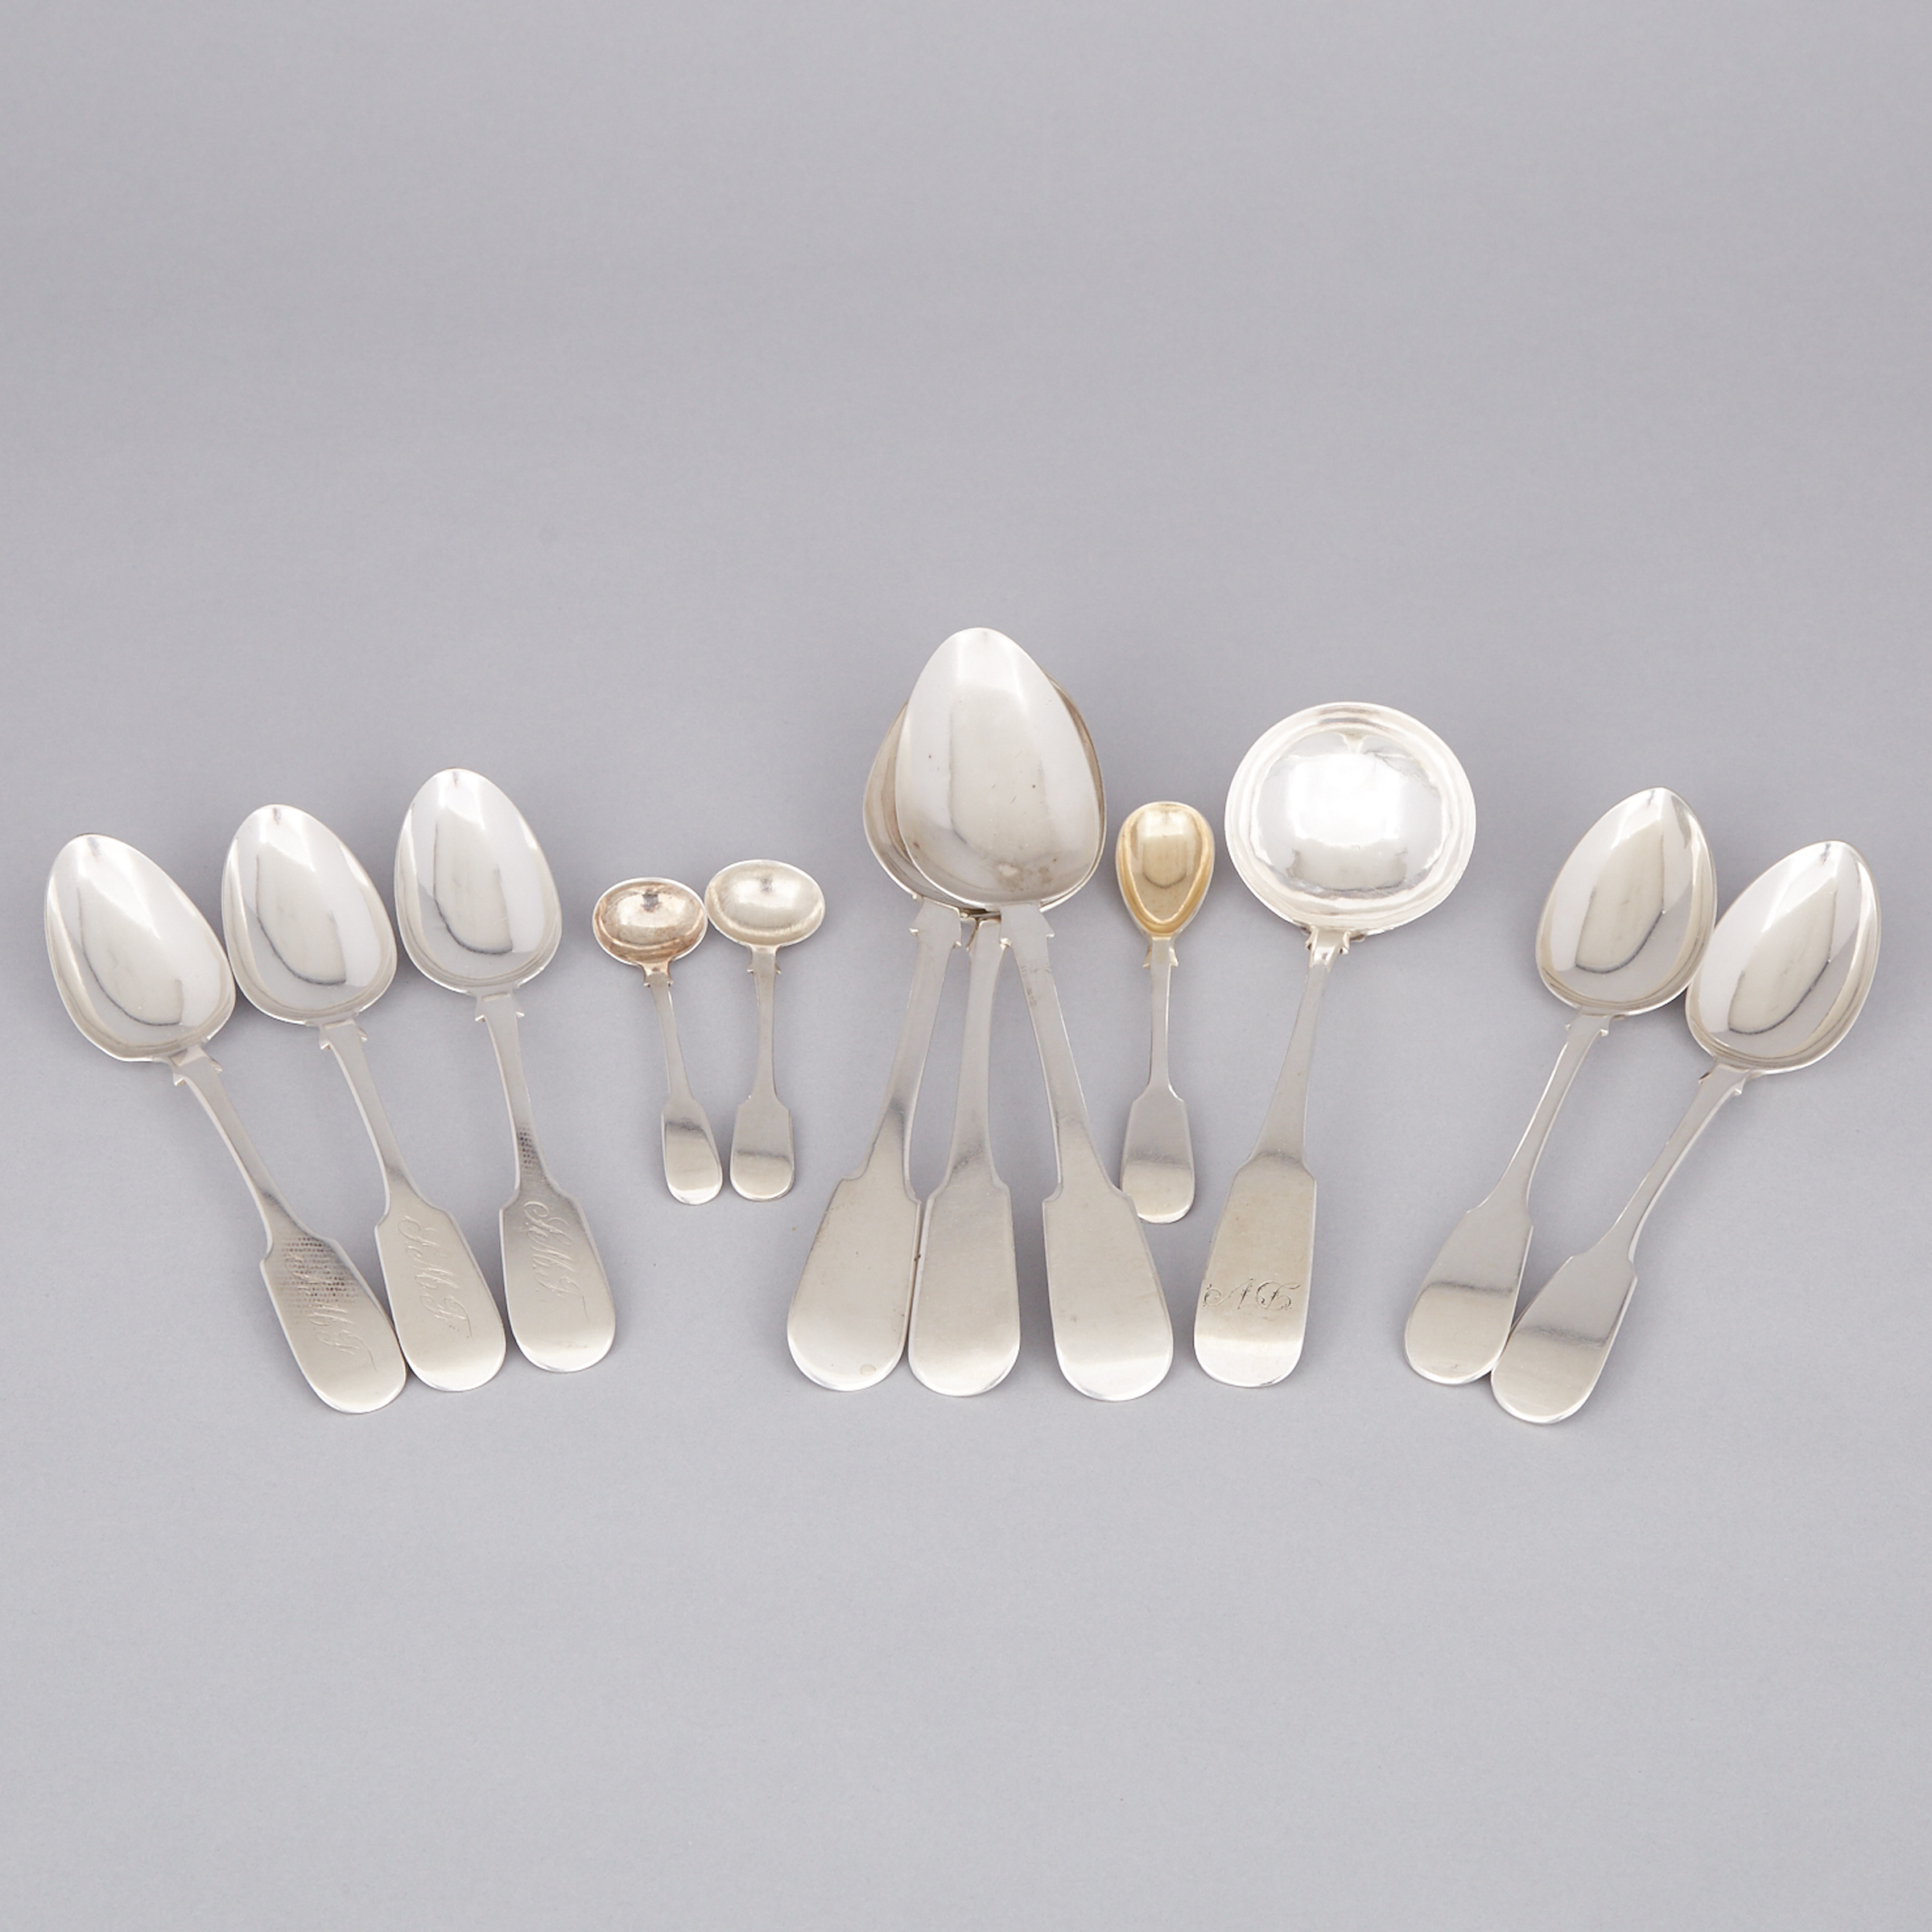 Canadian Silver Fiddle Pattern Flatware, Quebec and Ontario makers, 19th century